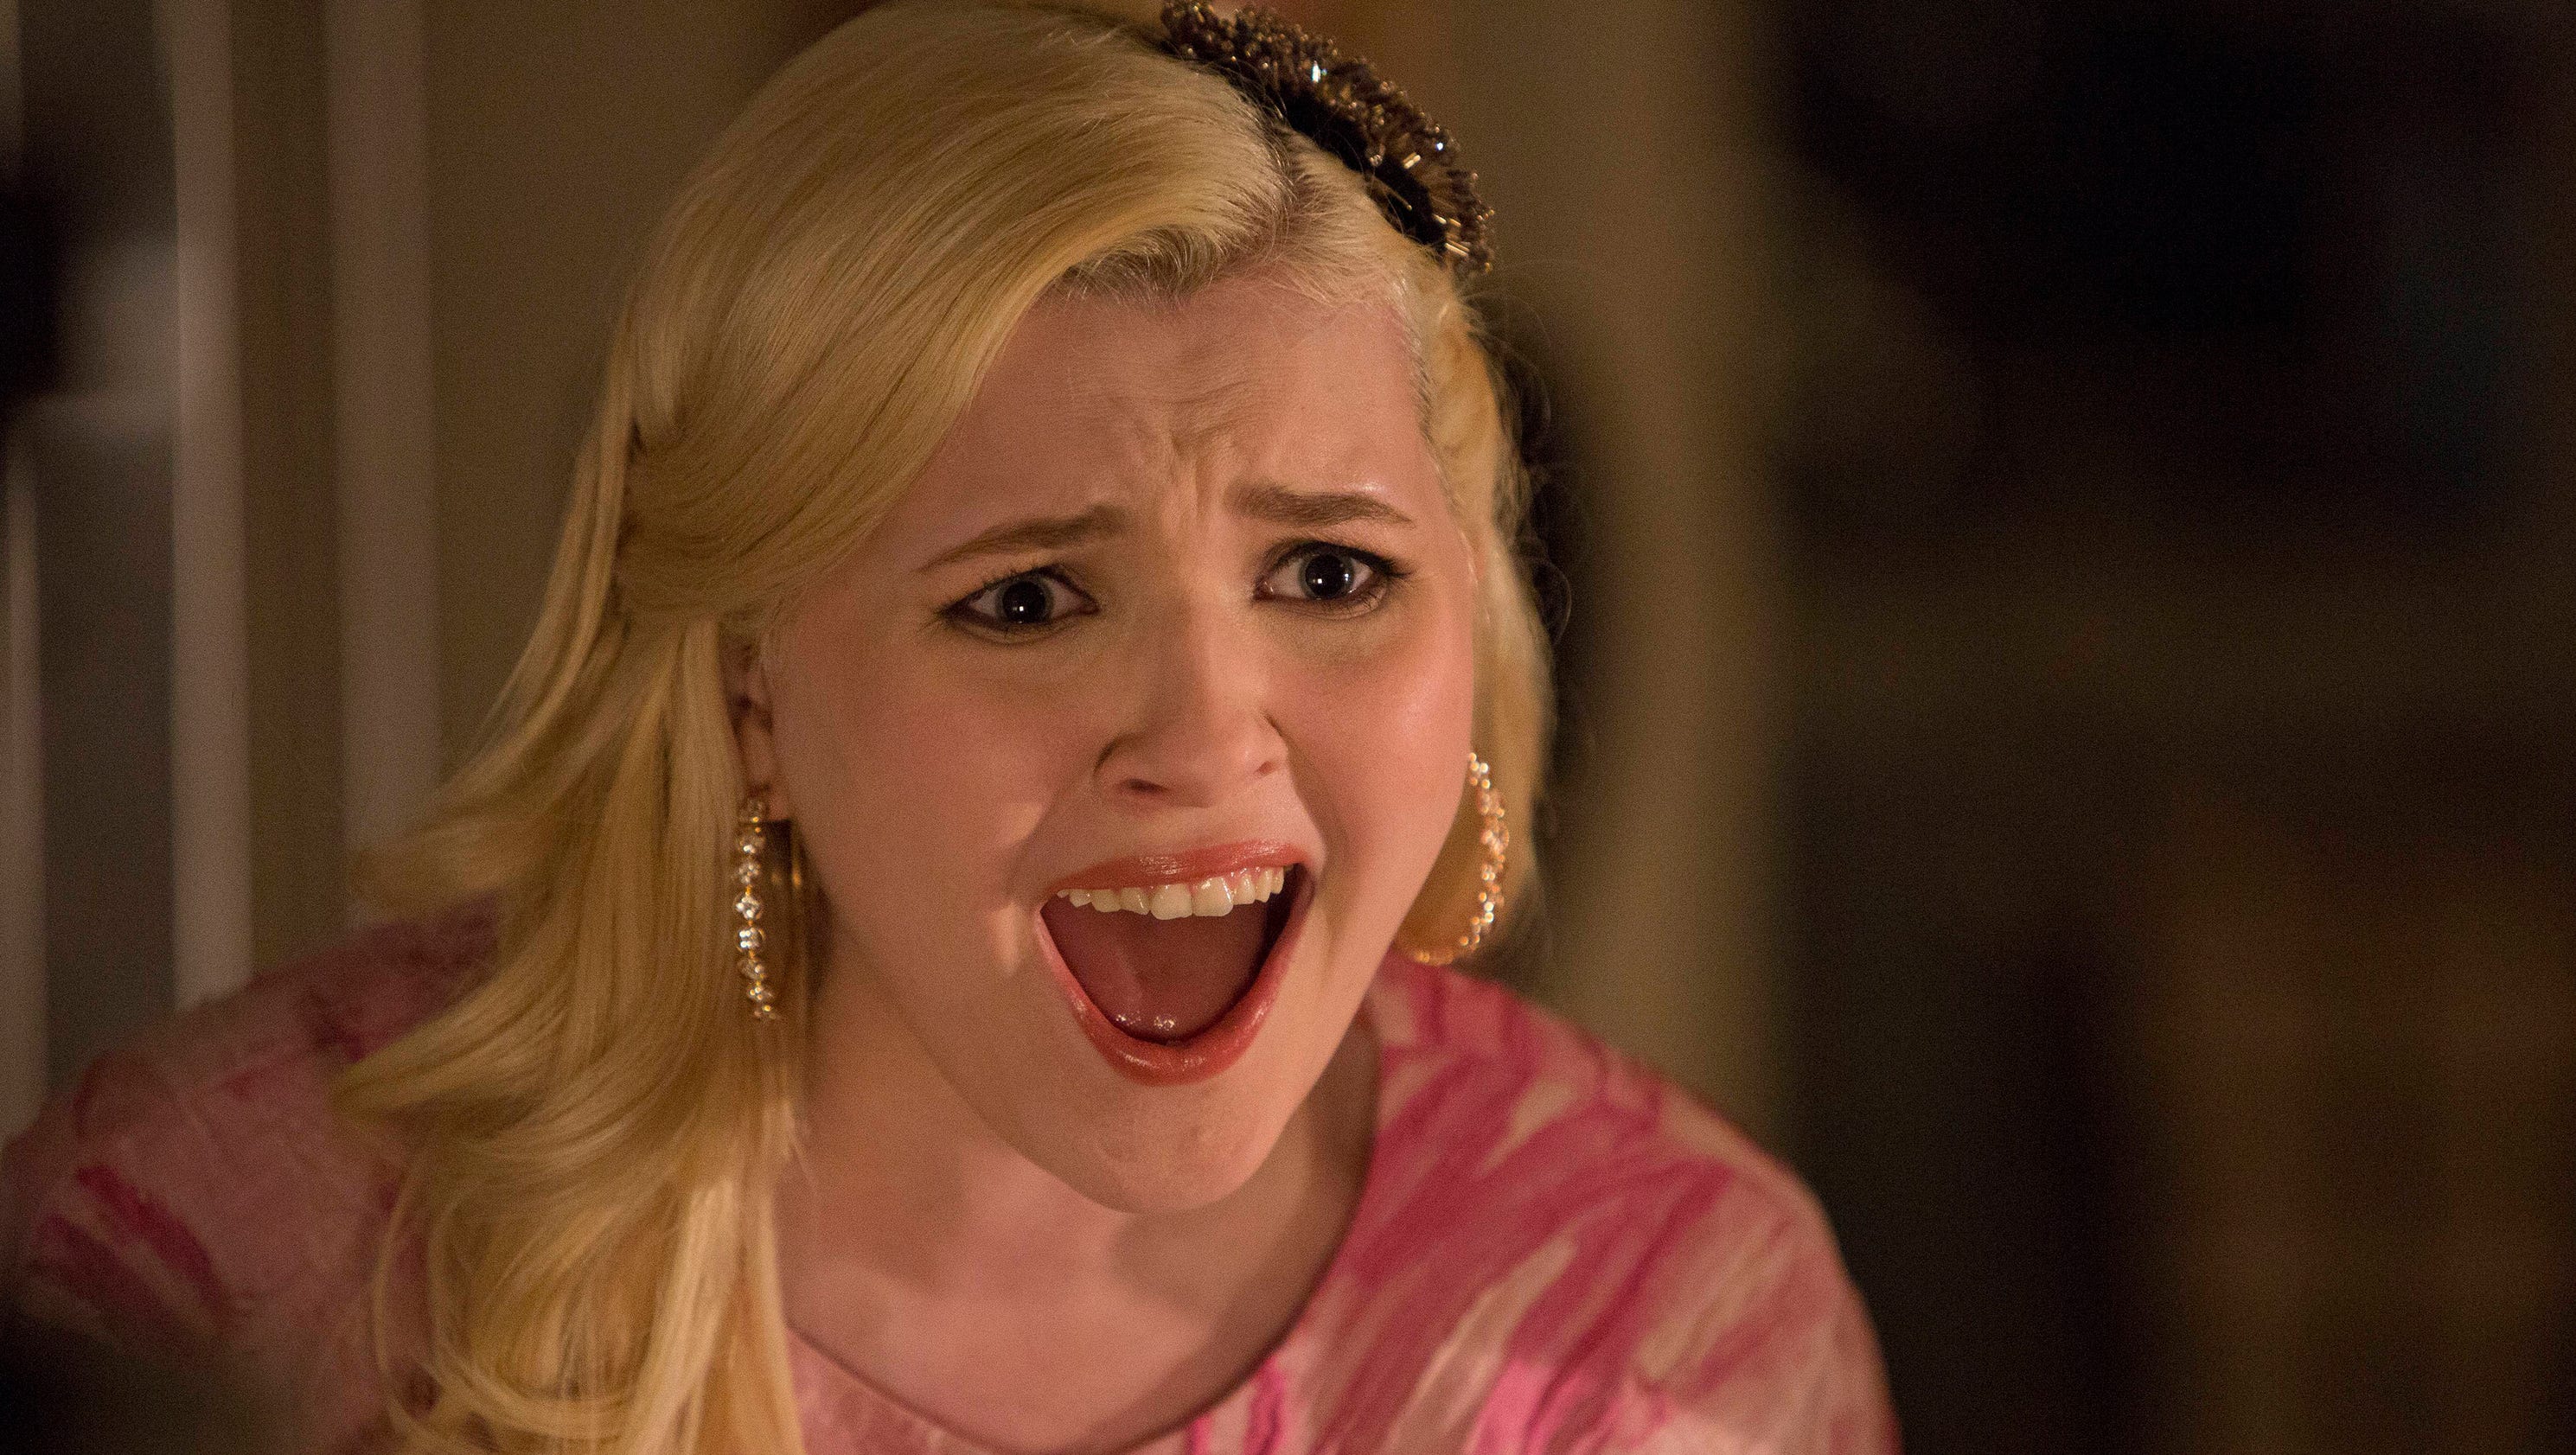 Review Scream Queens Is Scare Com Mishmash But At Least It S Different